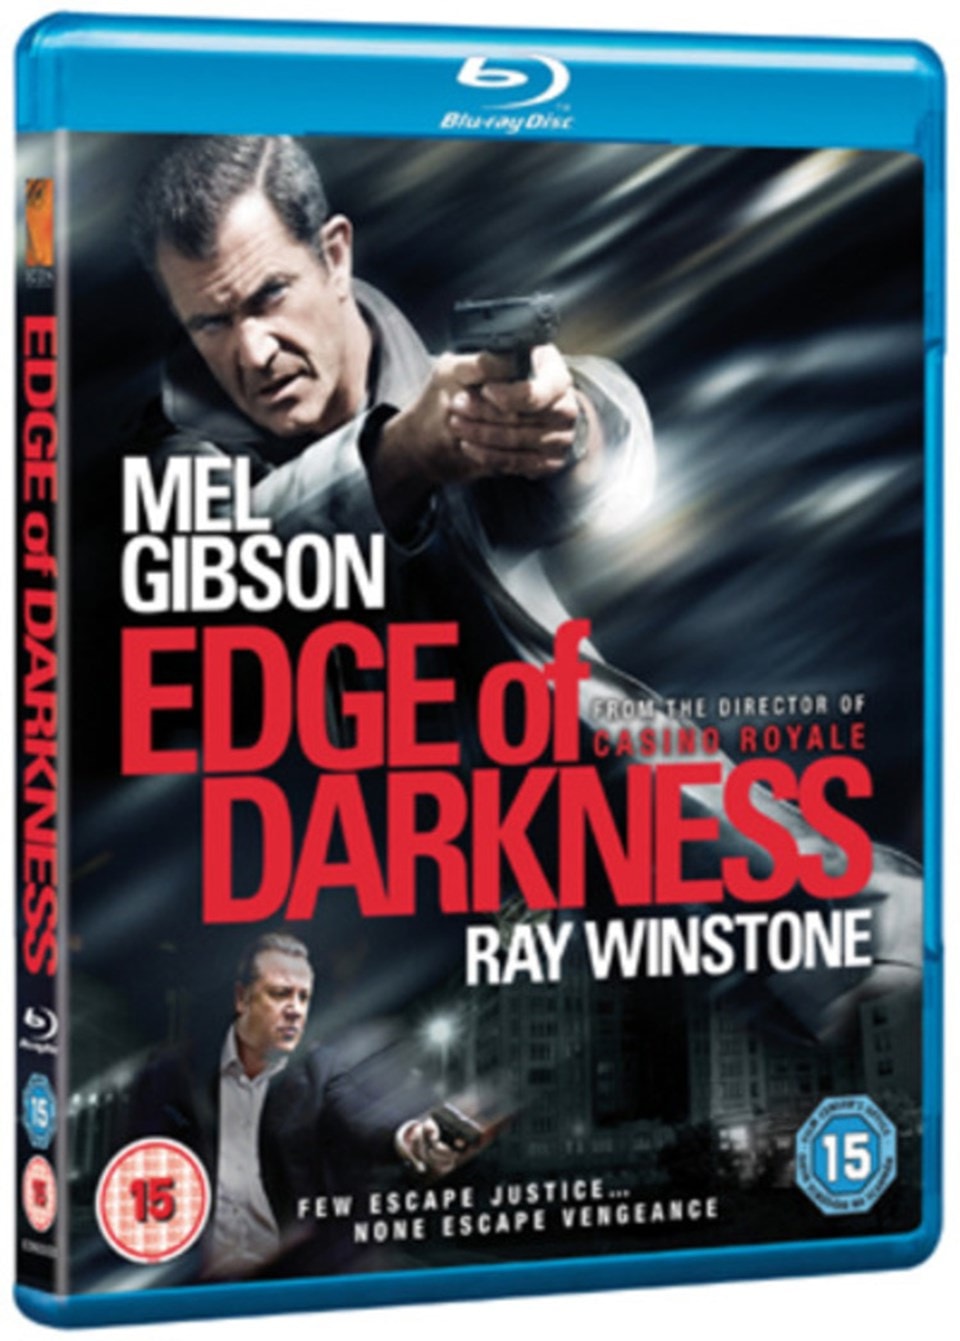 Edge of Darkness | Blu-ray | Free shipping over £20 | HMV Store